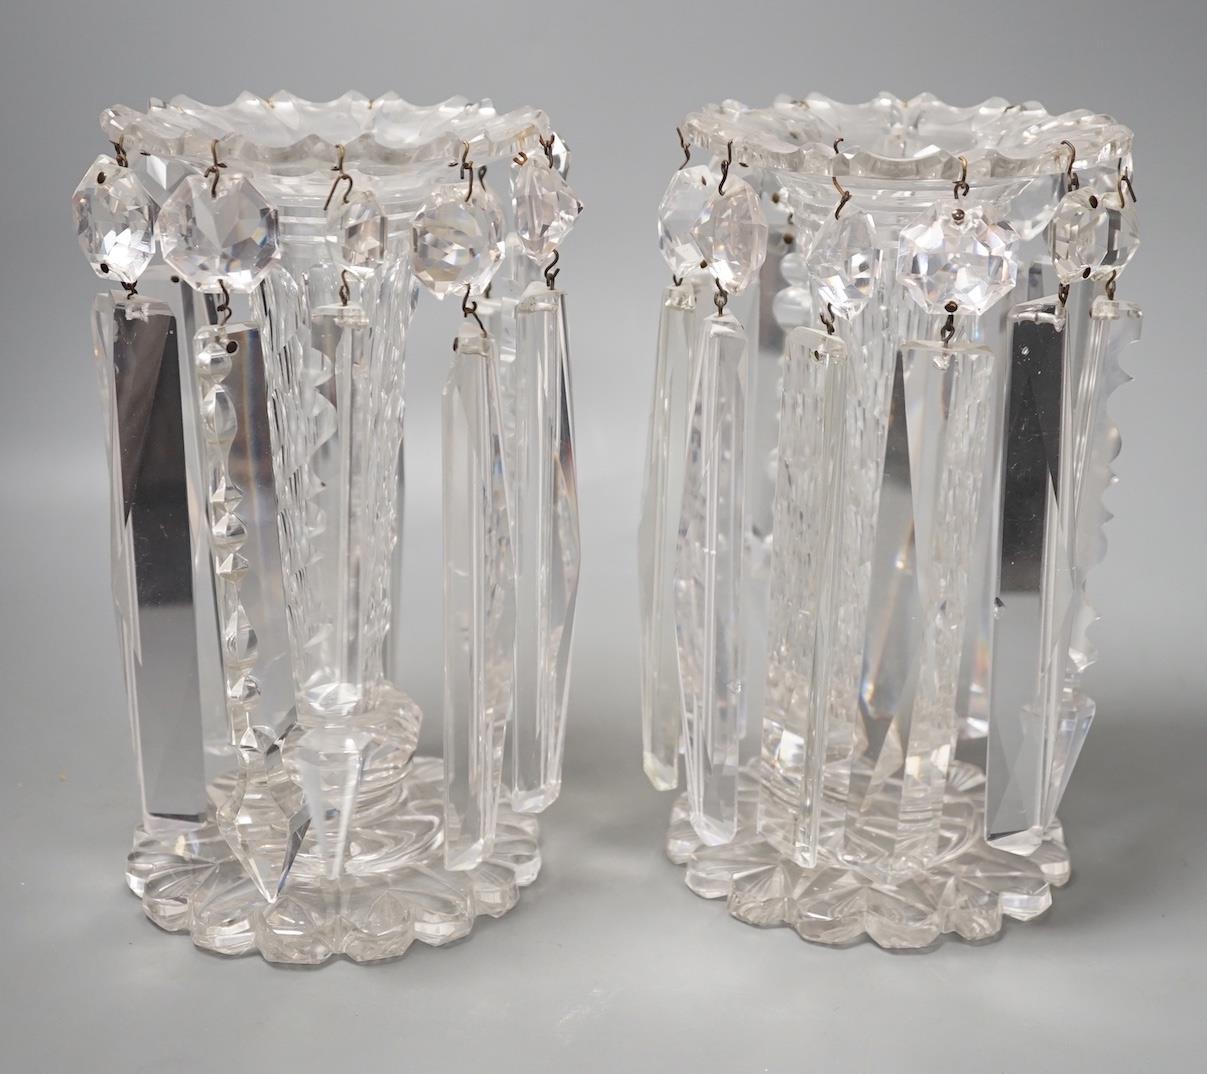 A Pair of Victorian clear glass table lustres - 23cm high - Image 4 of 6